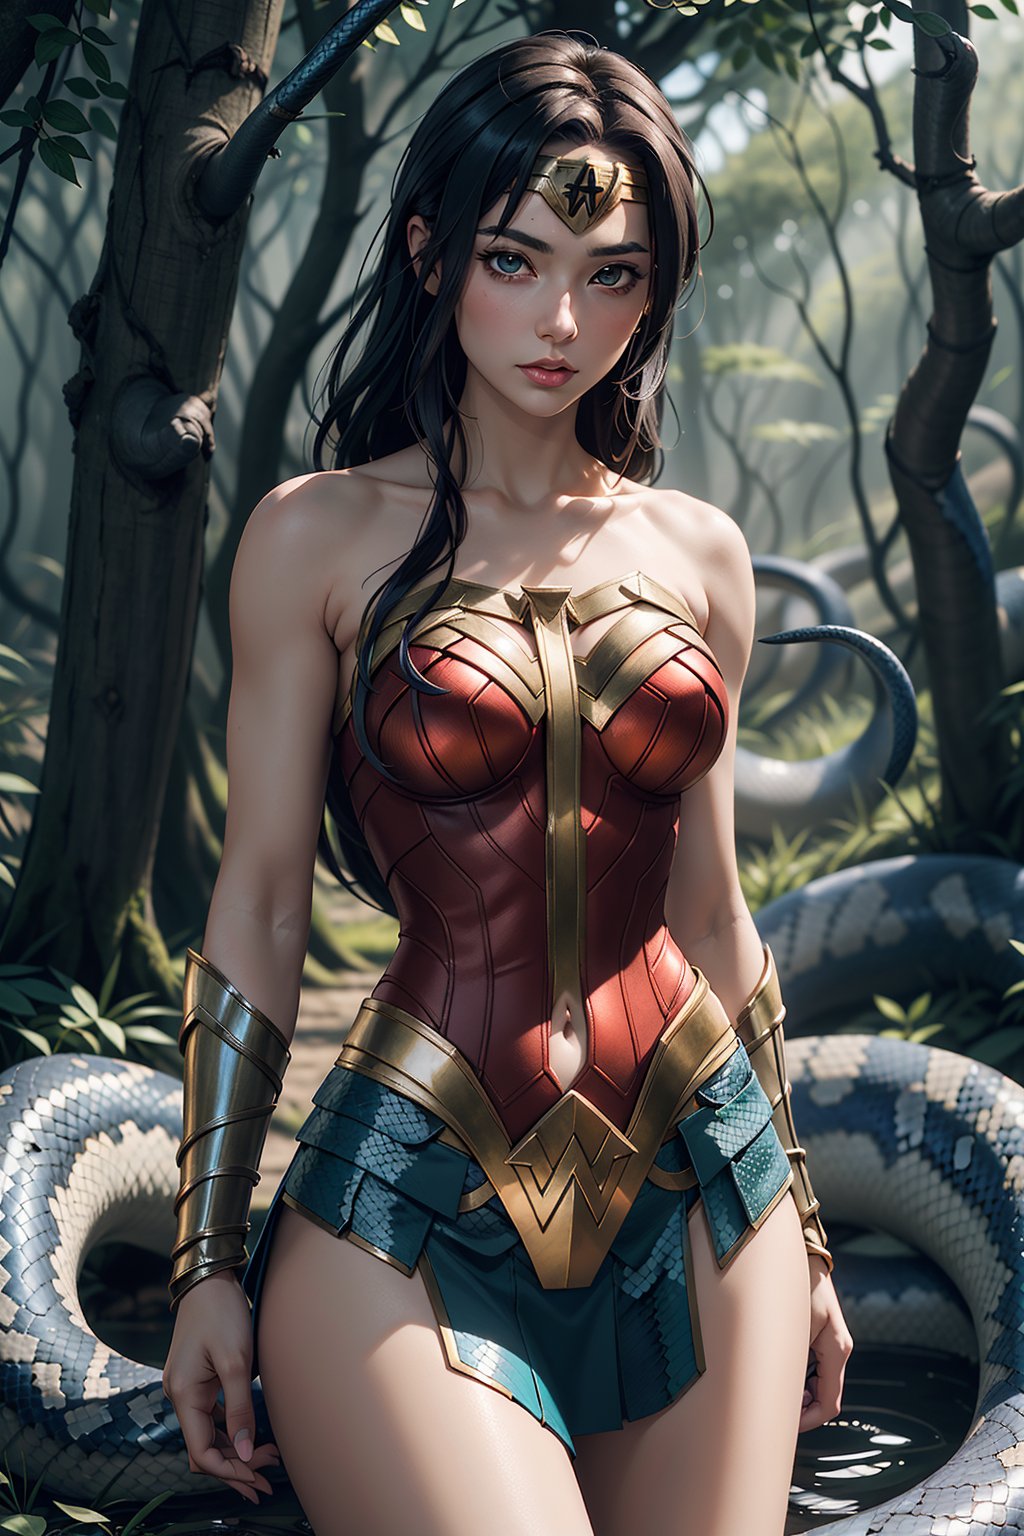 Description: Generate an image of an anime-style wonder woman upper body that combines human and snake features seamlessly. The character should have the upper body of a beautiful anime girl, with colorful hair and expressive eyes. From the waist down, her body should smoothly transition into the serpentine form of a snake, with vibrant scales and patterns. The lamia should be coiled elegantly, possibly in a forest or magical setting, showcasing her mysterious and enchanting nature.